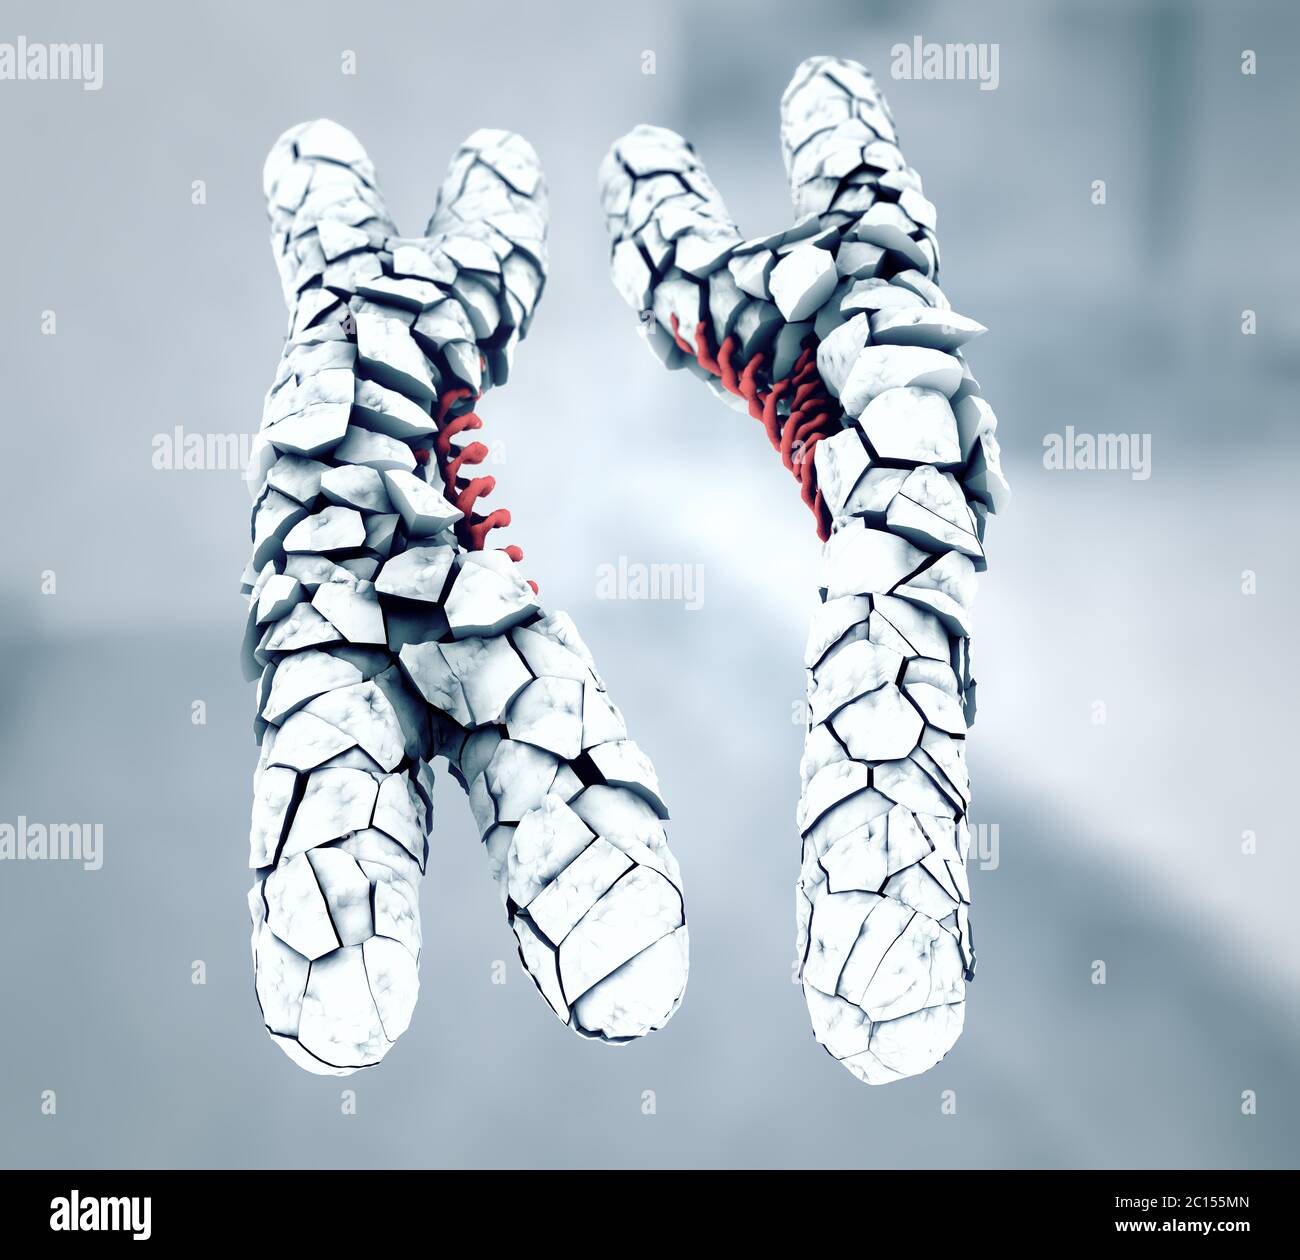 3D Illustration of broken or defected white colored x and y chromosomes Stock Photo